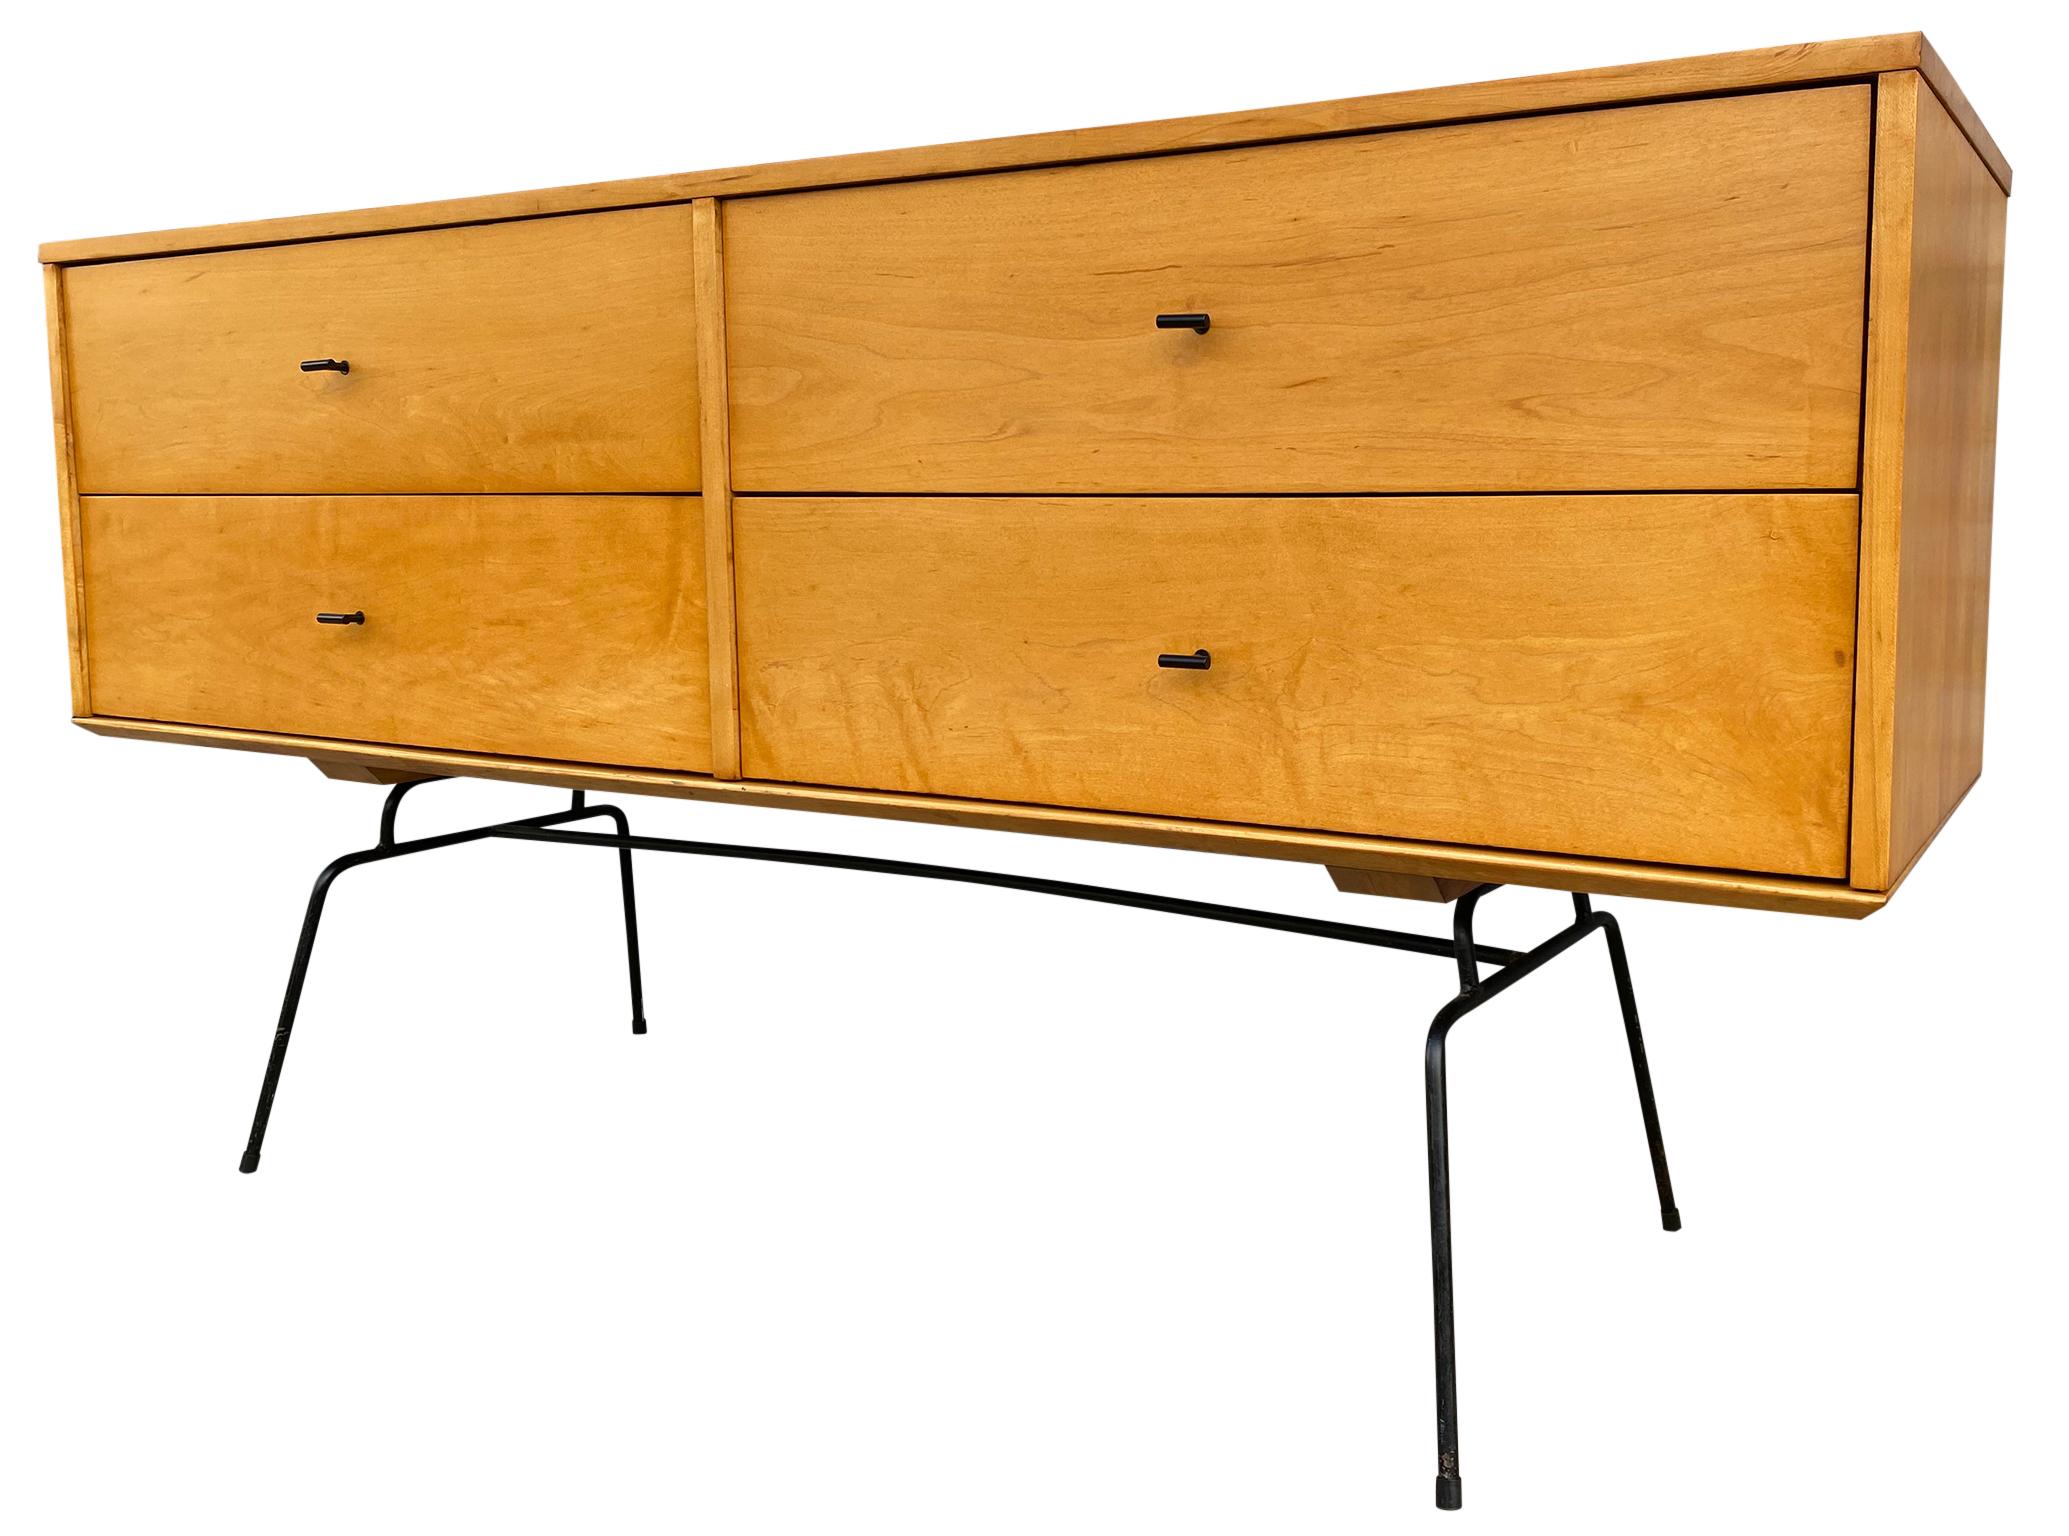 Mid-Century Modern Midcentury 4 Drawer Low Dresser by Paul McCobb Planner Group #1504 on Iron Base